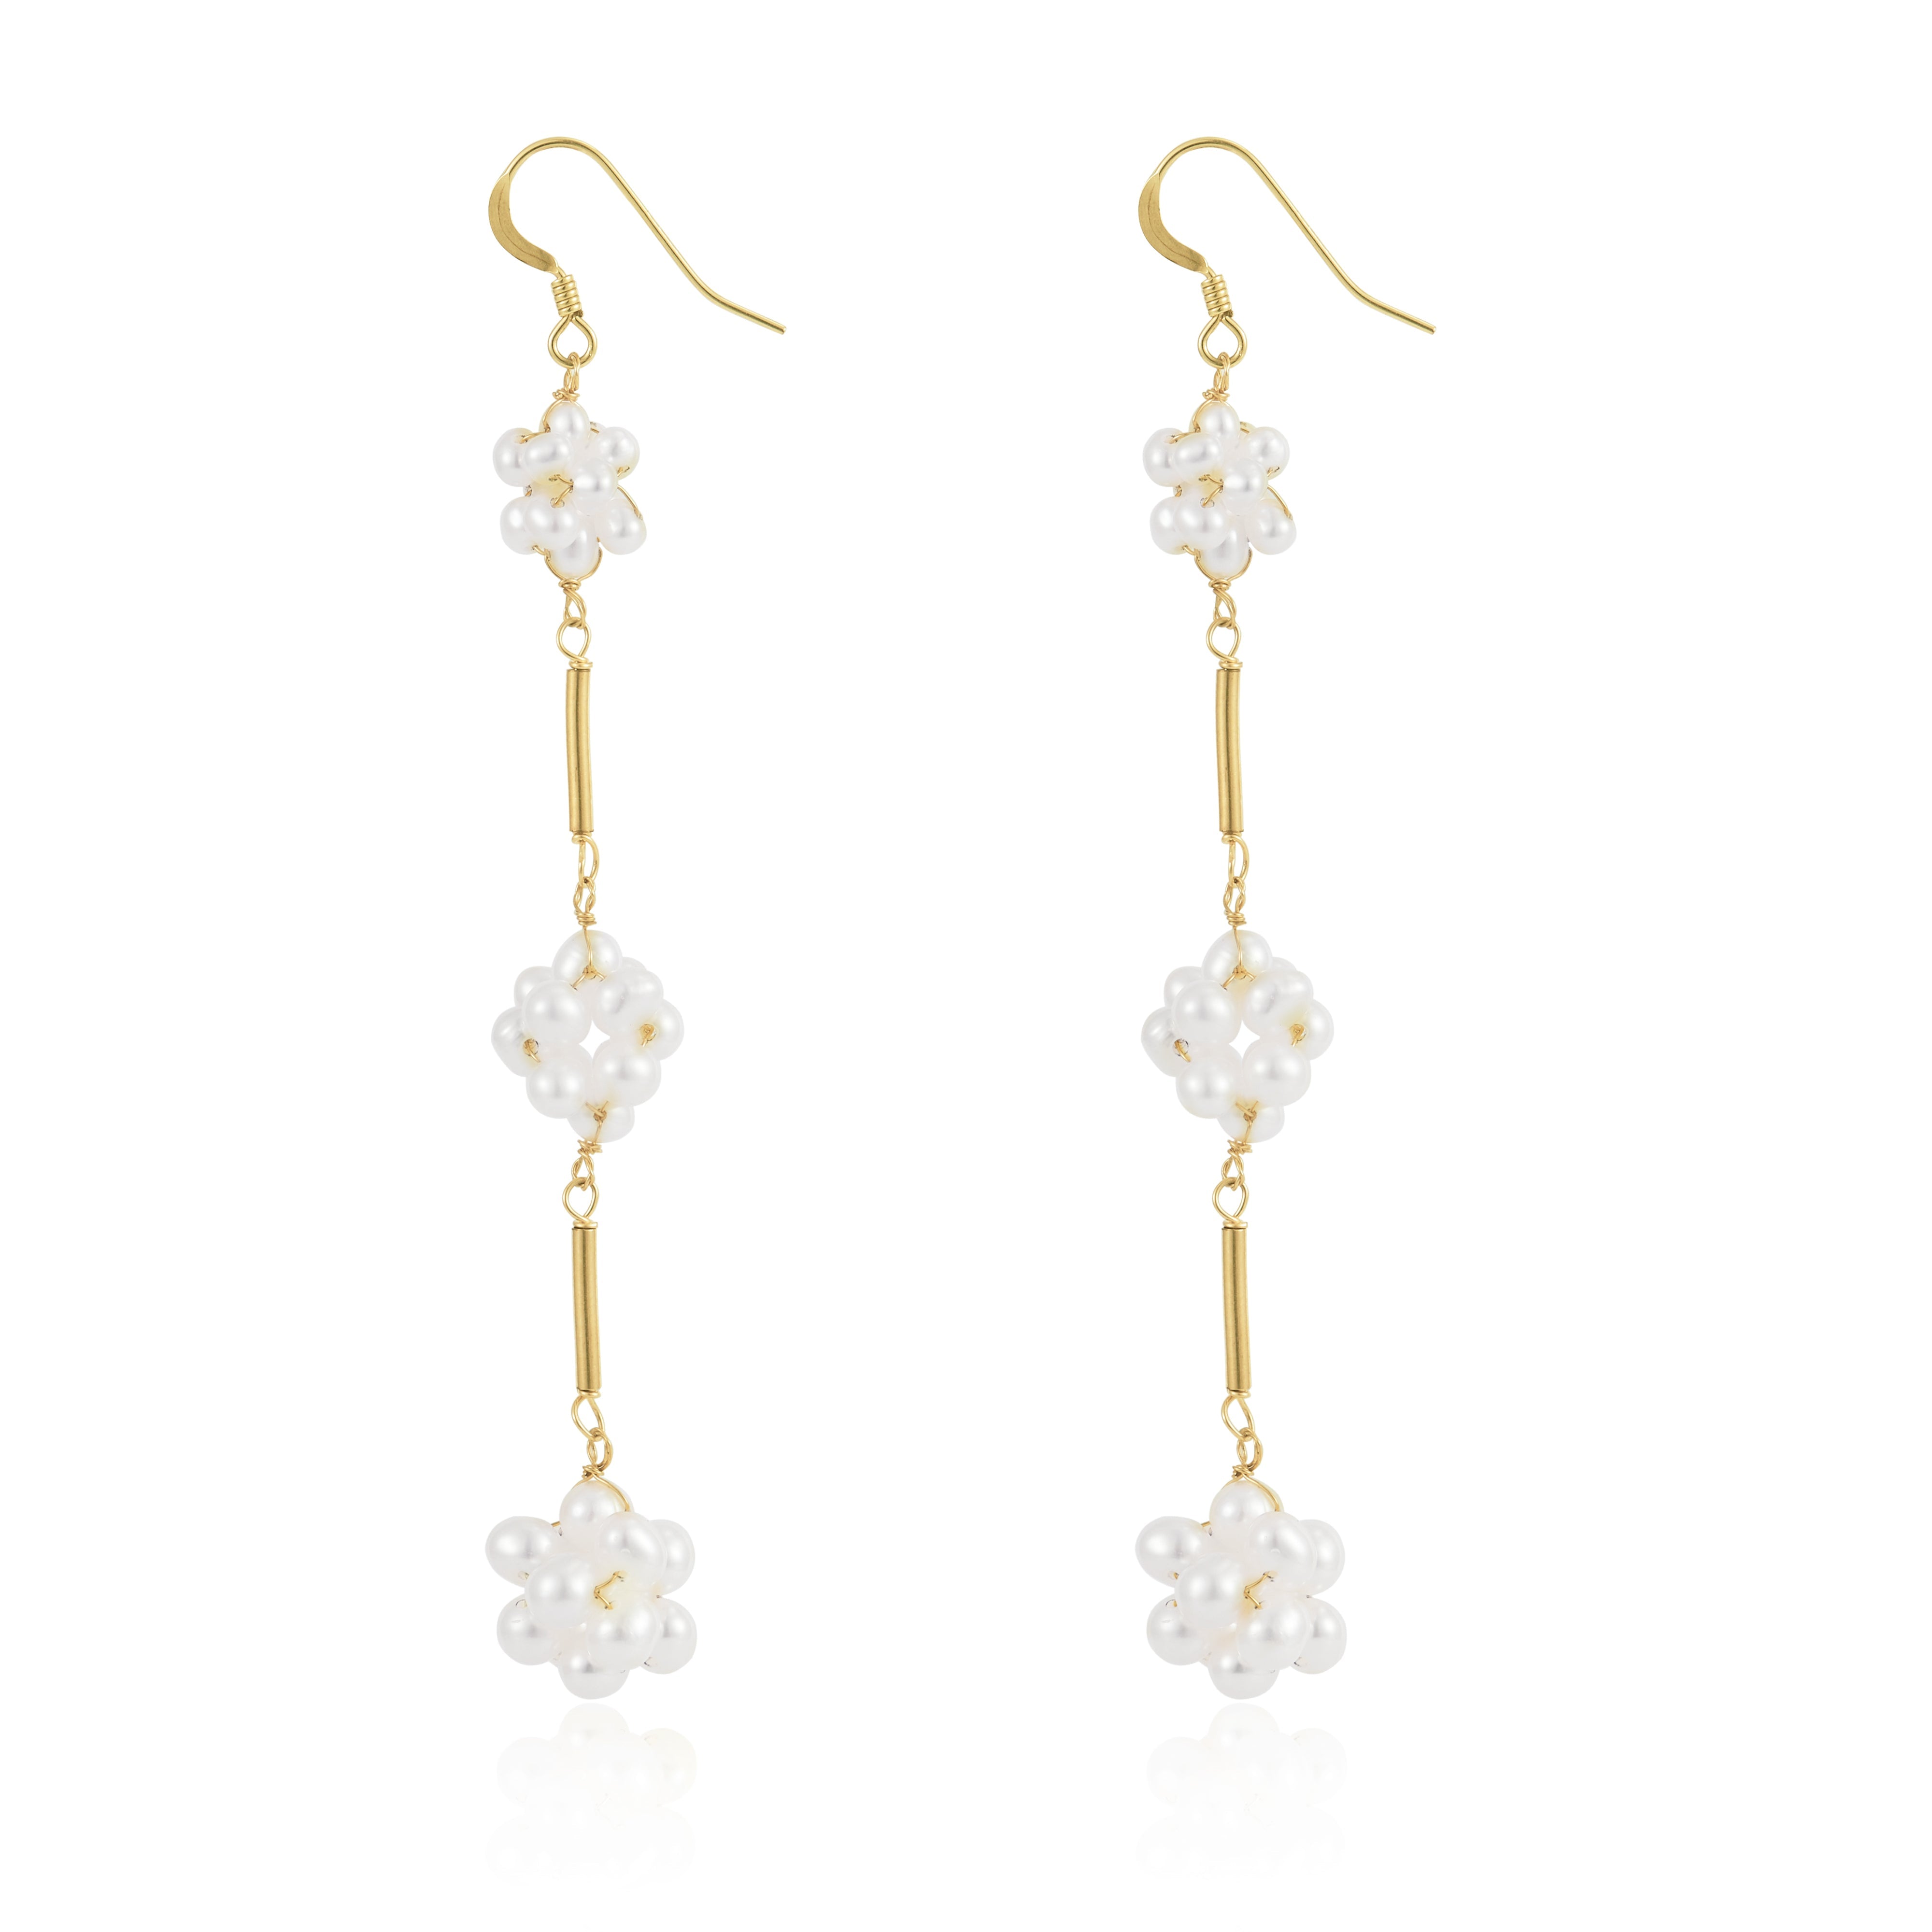 COCOKIM Blossom Series Triple Cluster Floral Earrings - floysun